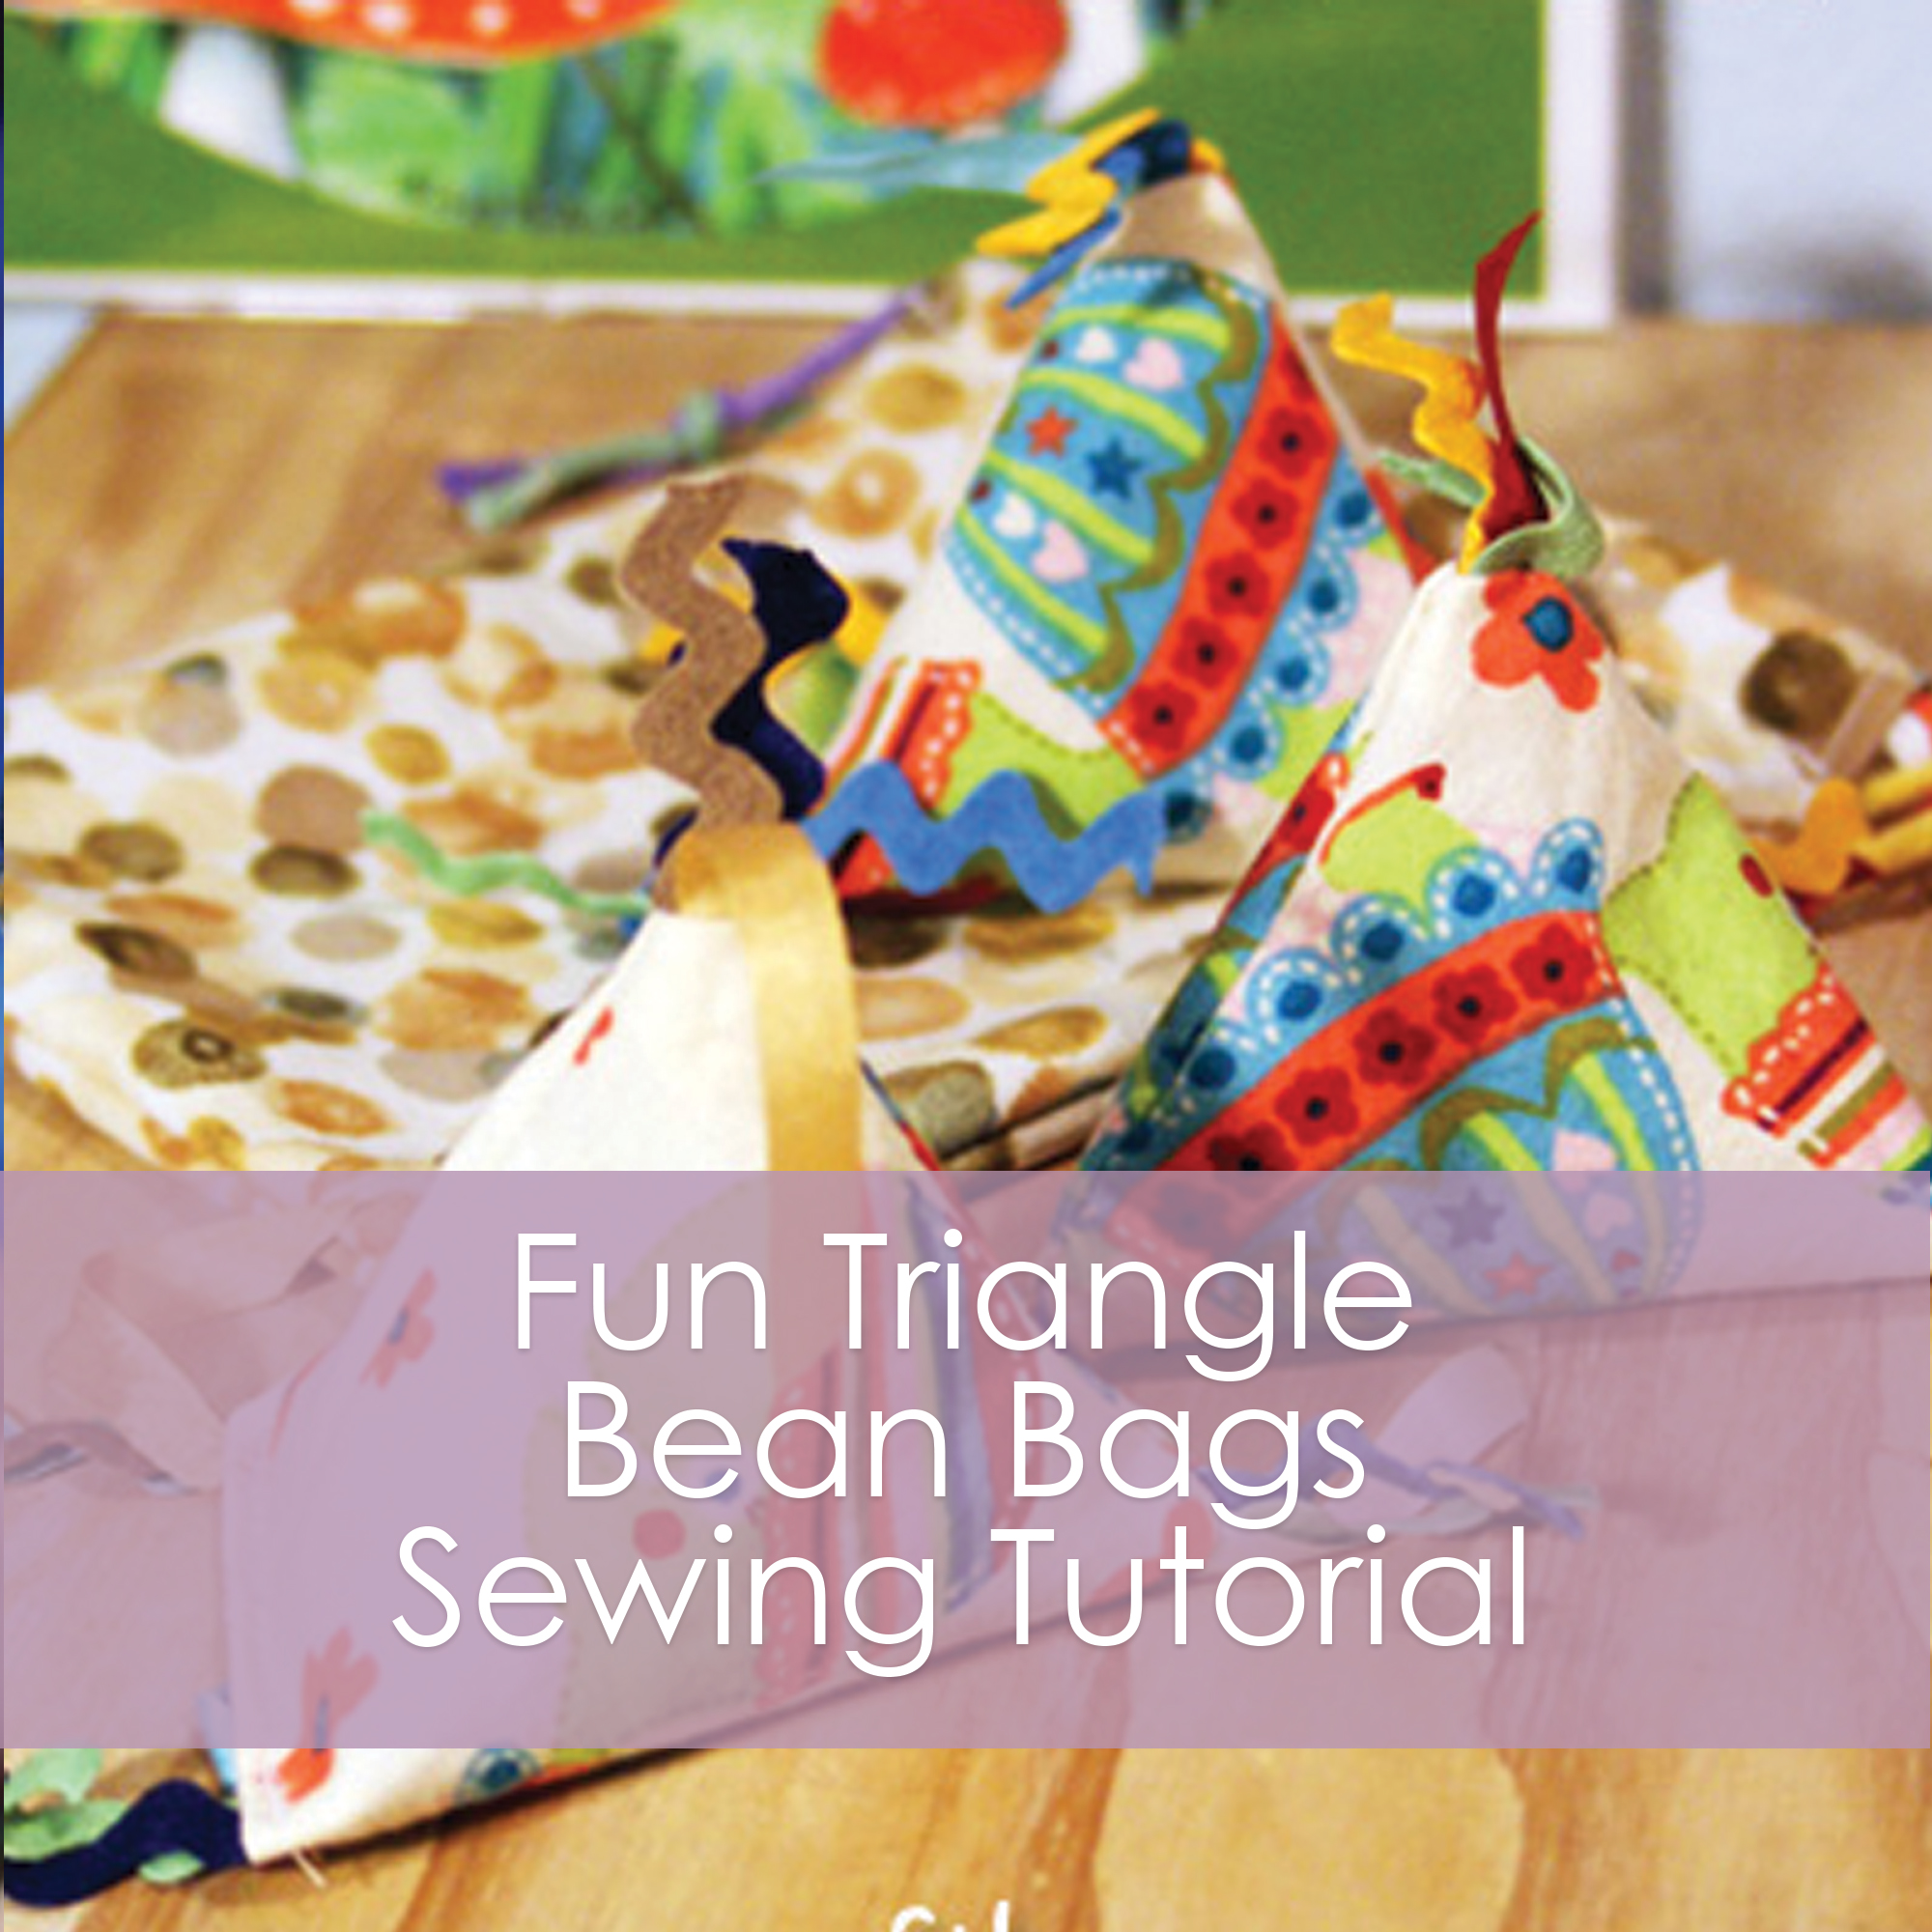 Triangle Bean Bags - a tutorial from Muse of the Morning